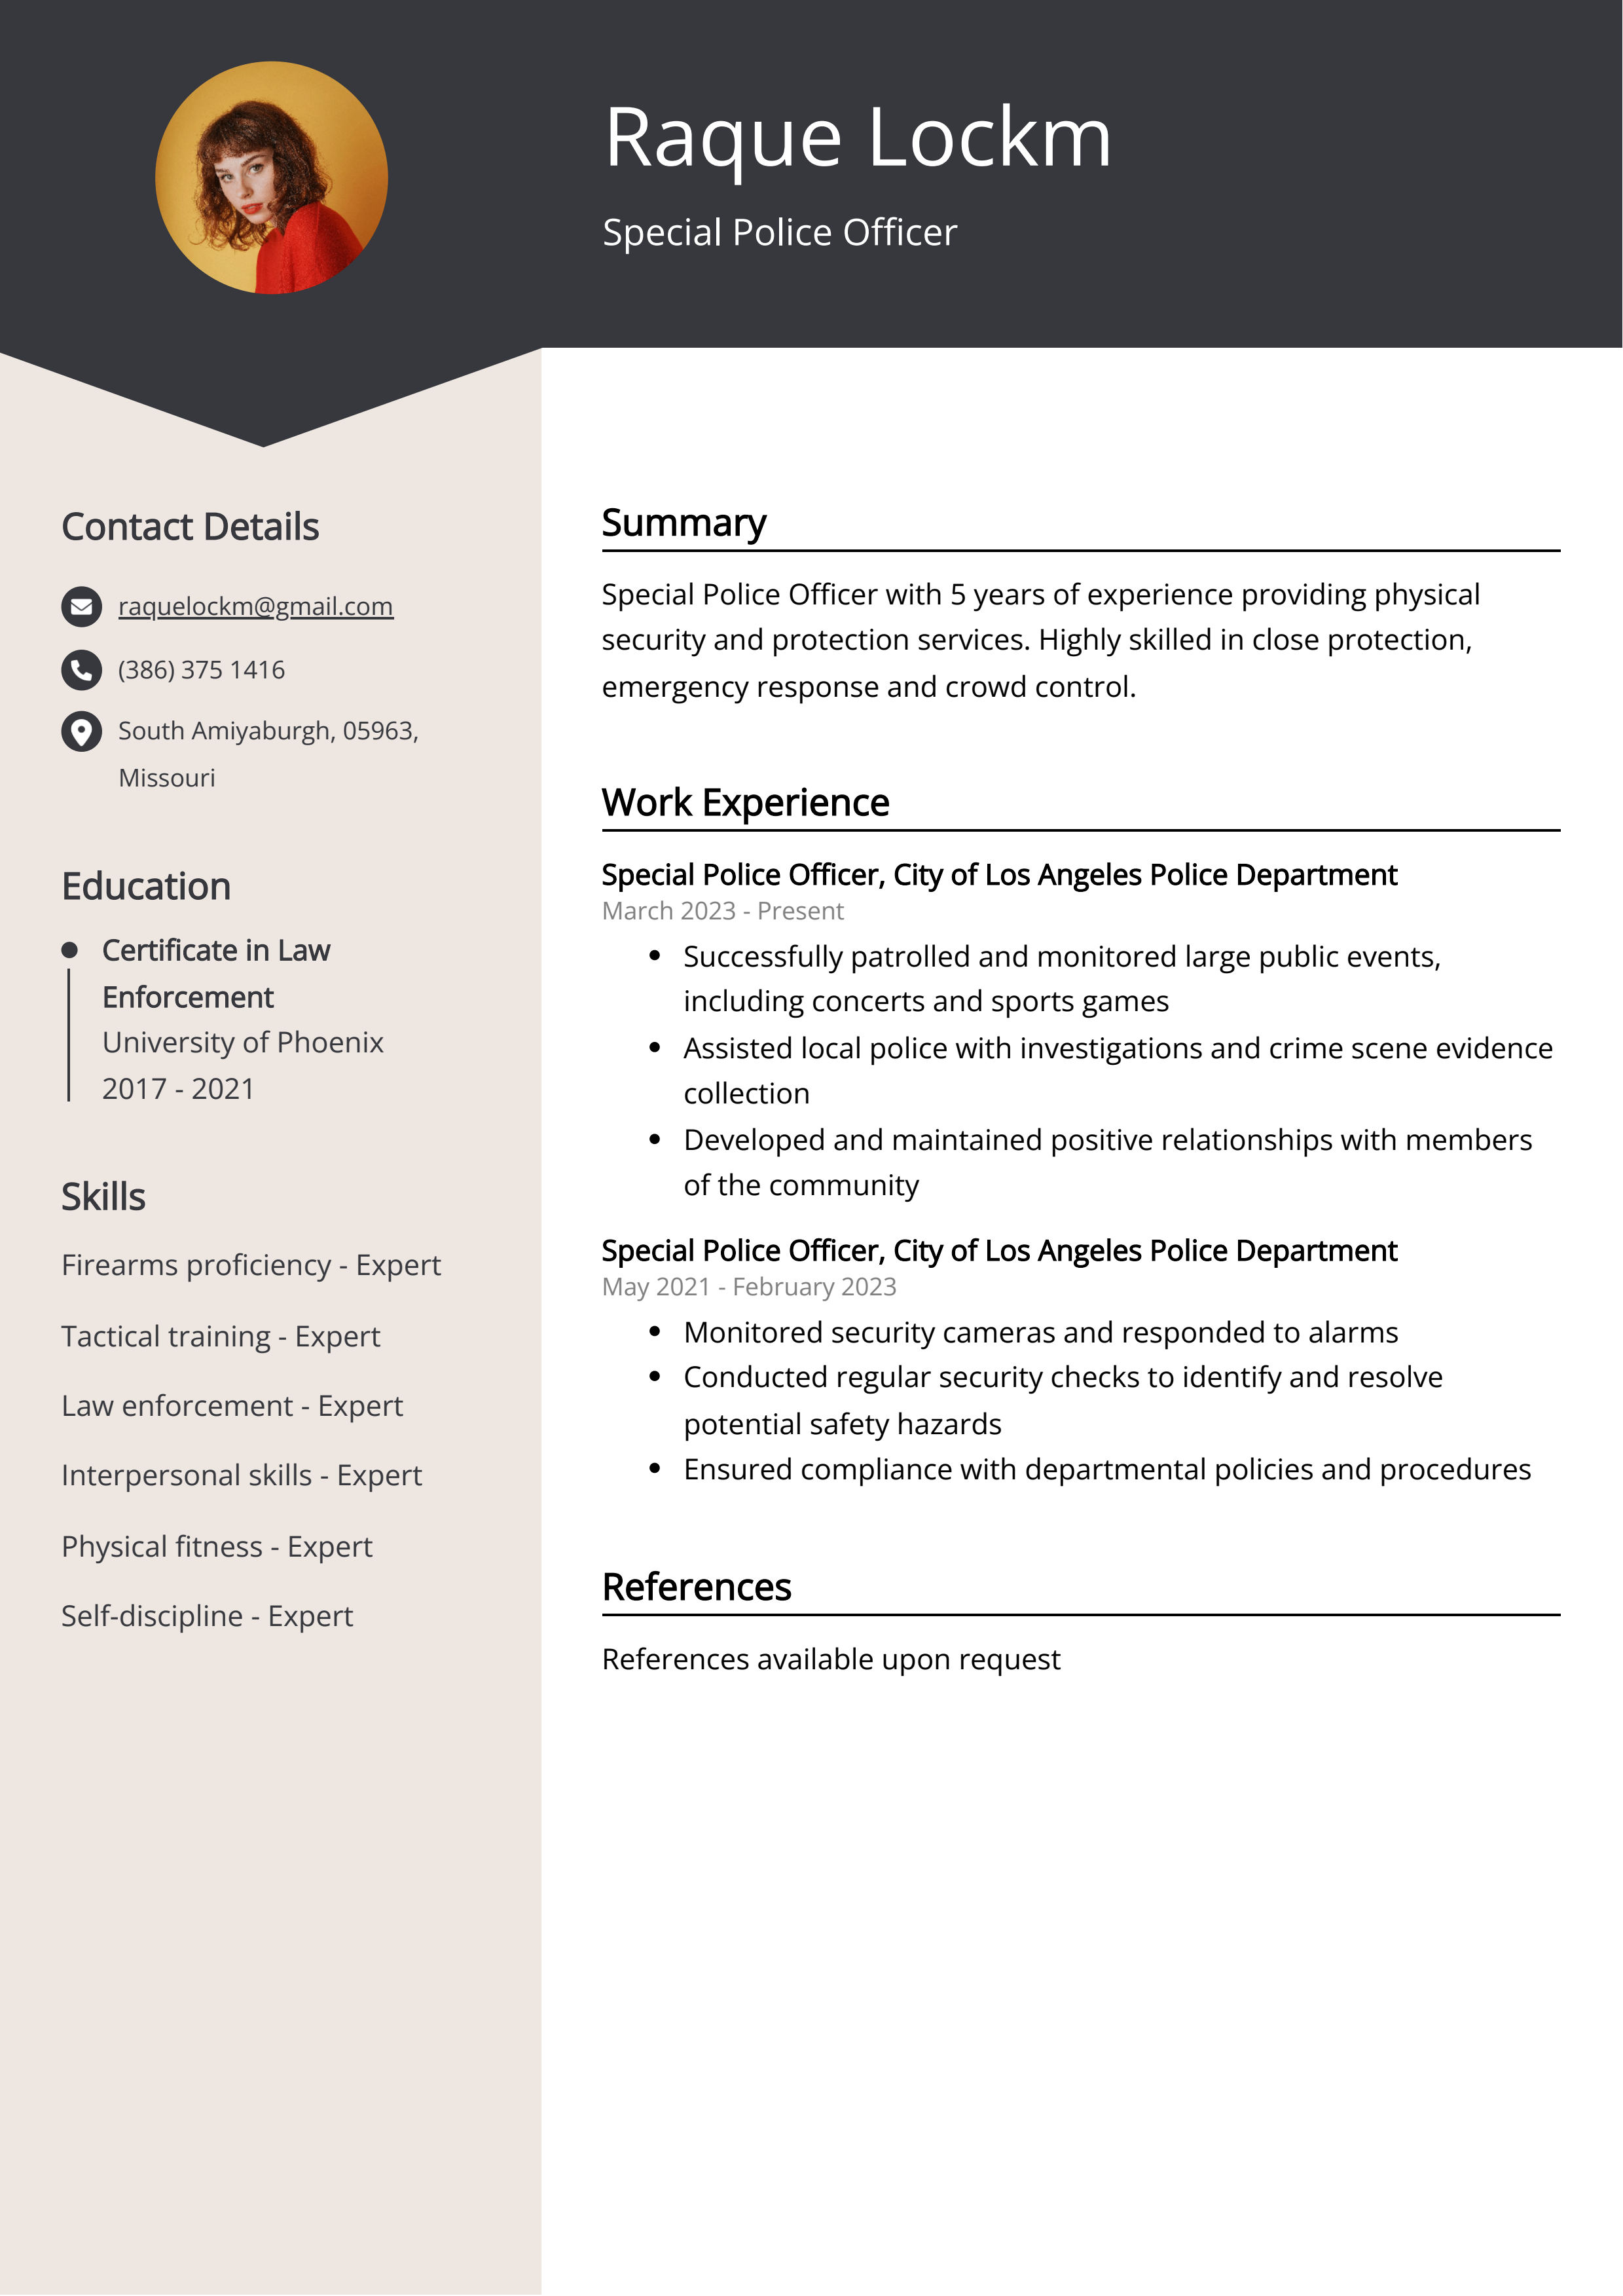 Special Police Officer Resume Example